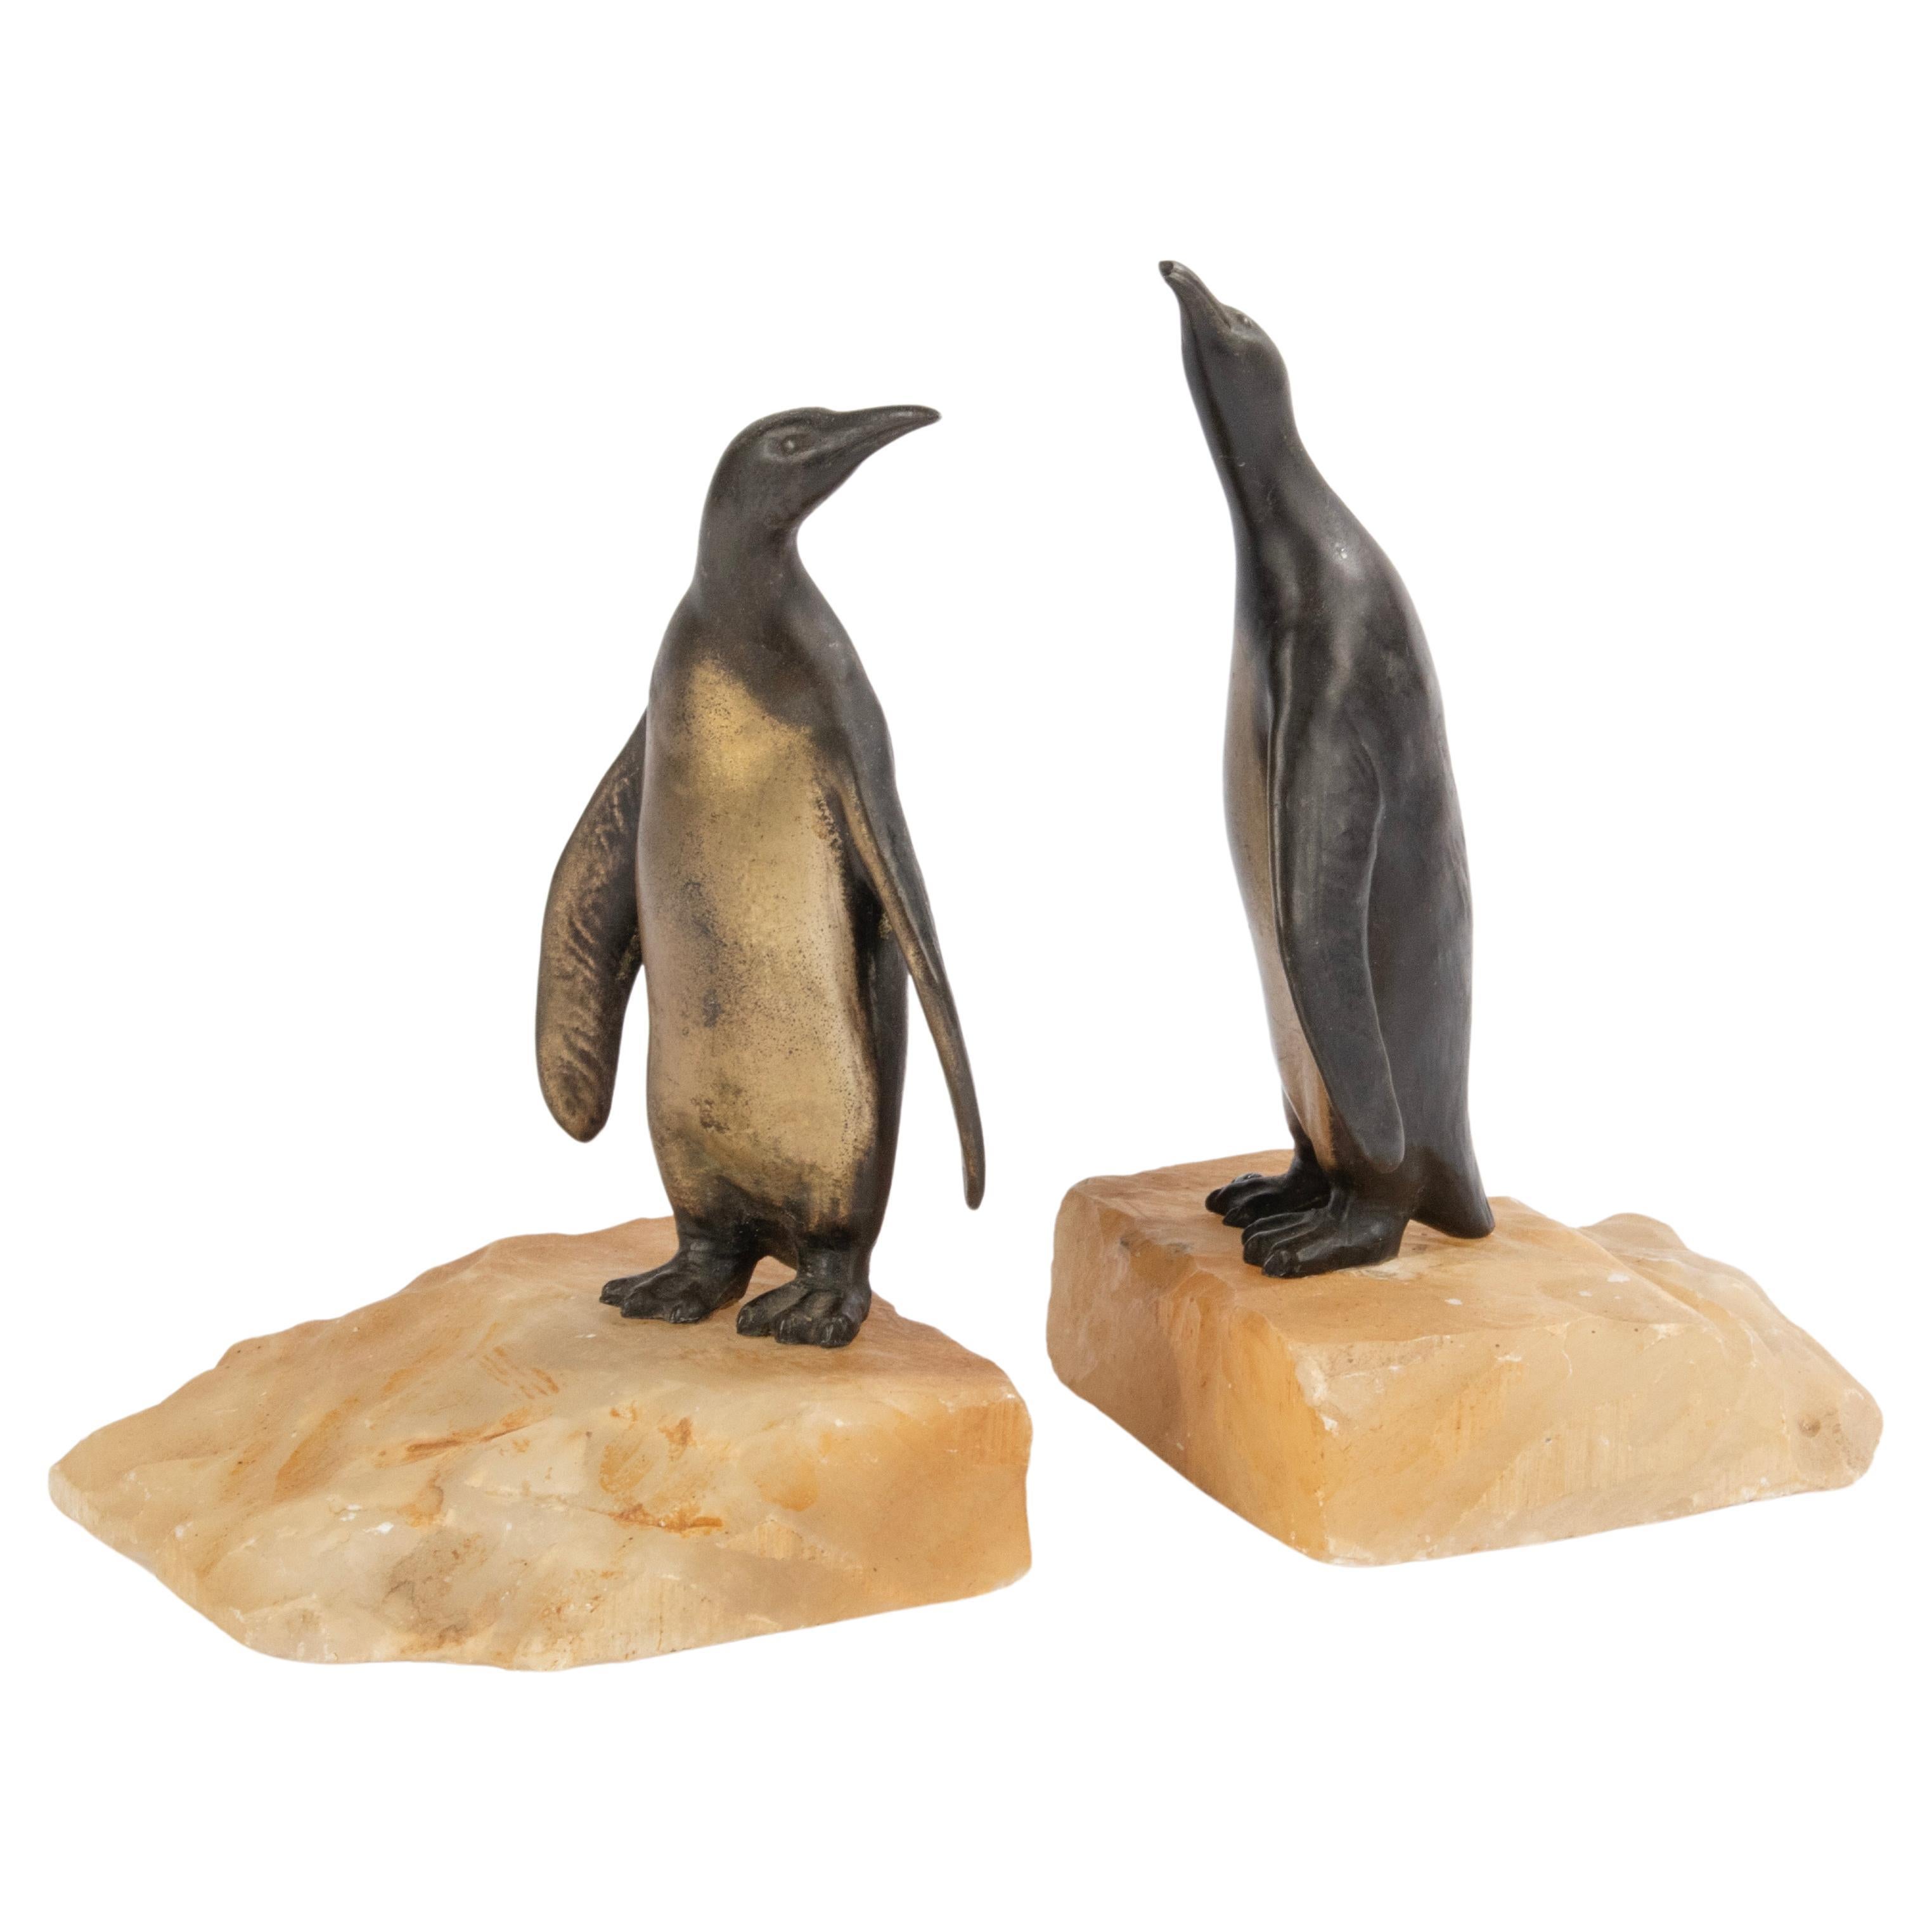 Art Deco period Spelter Bookend with Pinguins 